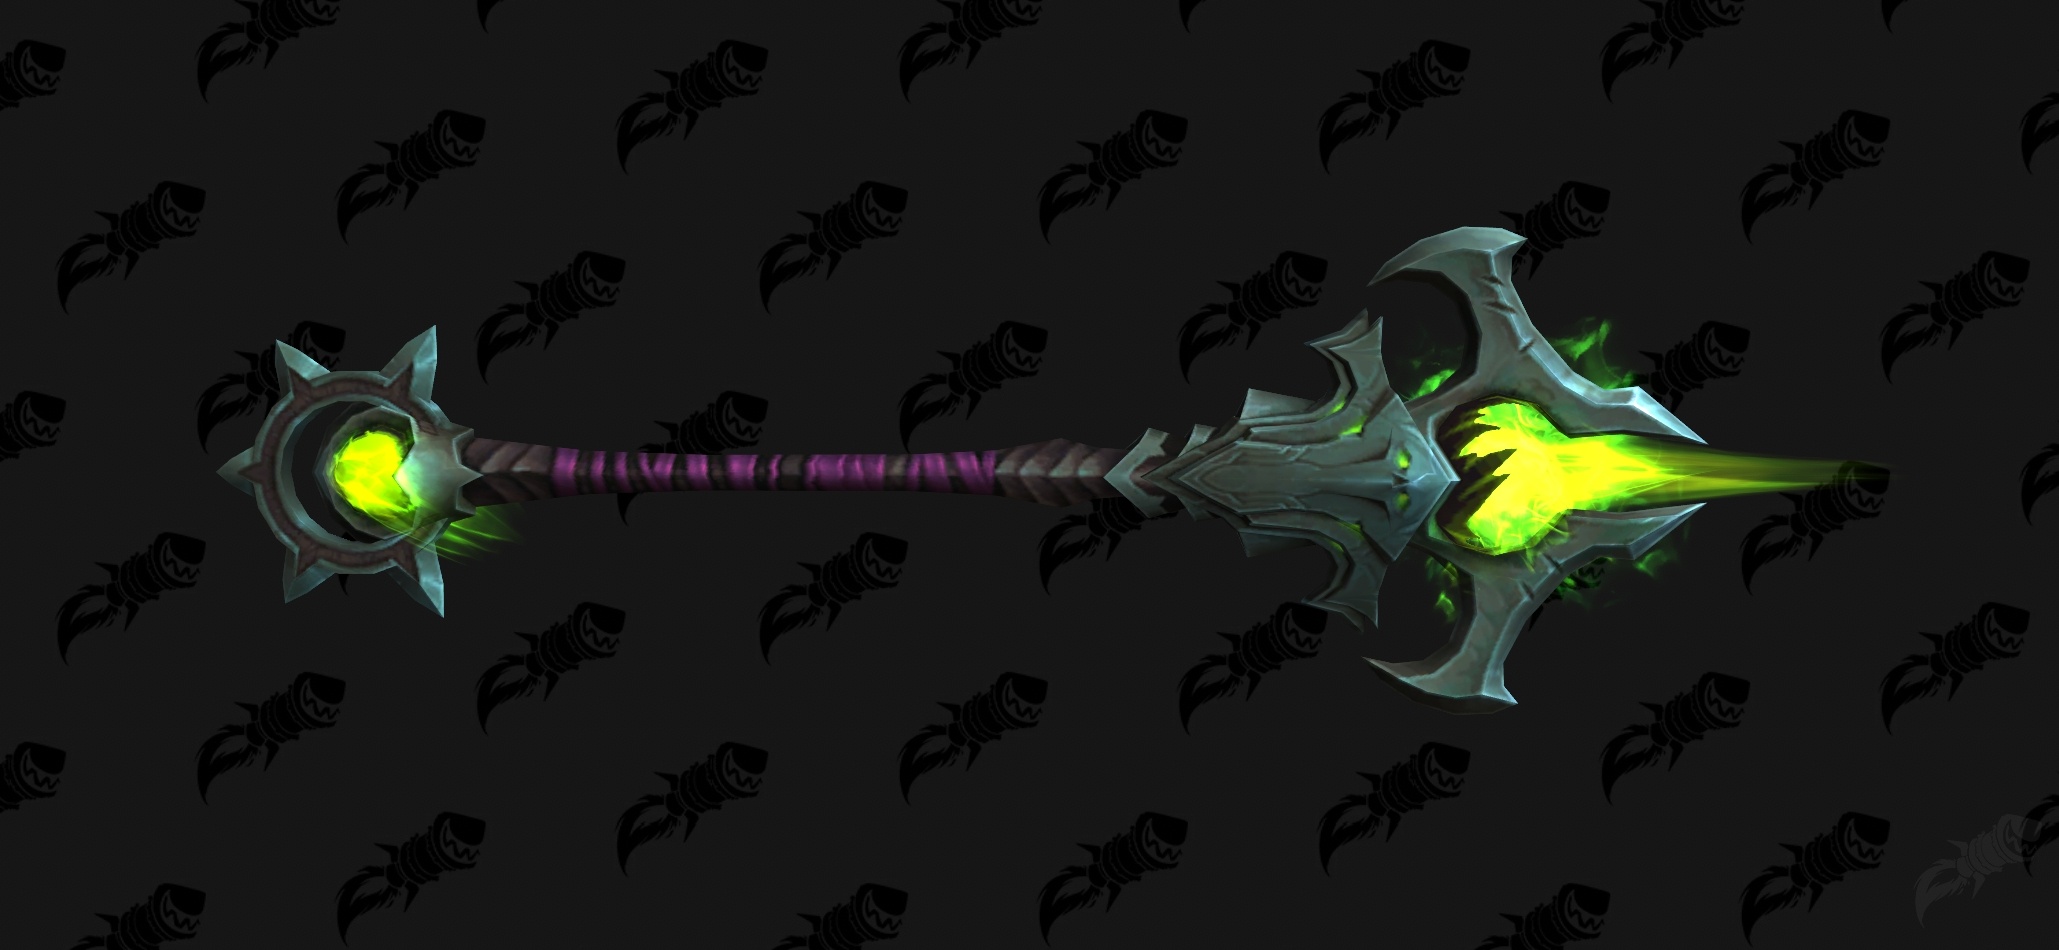 New Chain Mail Bikinis Datamined in Patch 10.0.5 PTR - Wowhead News